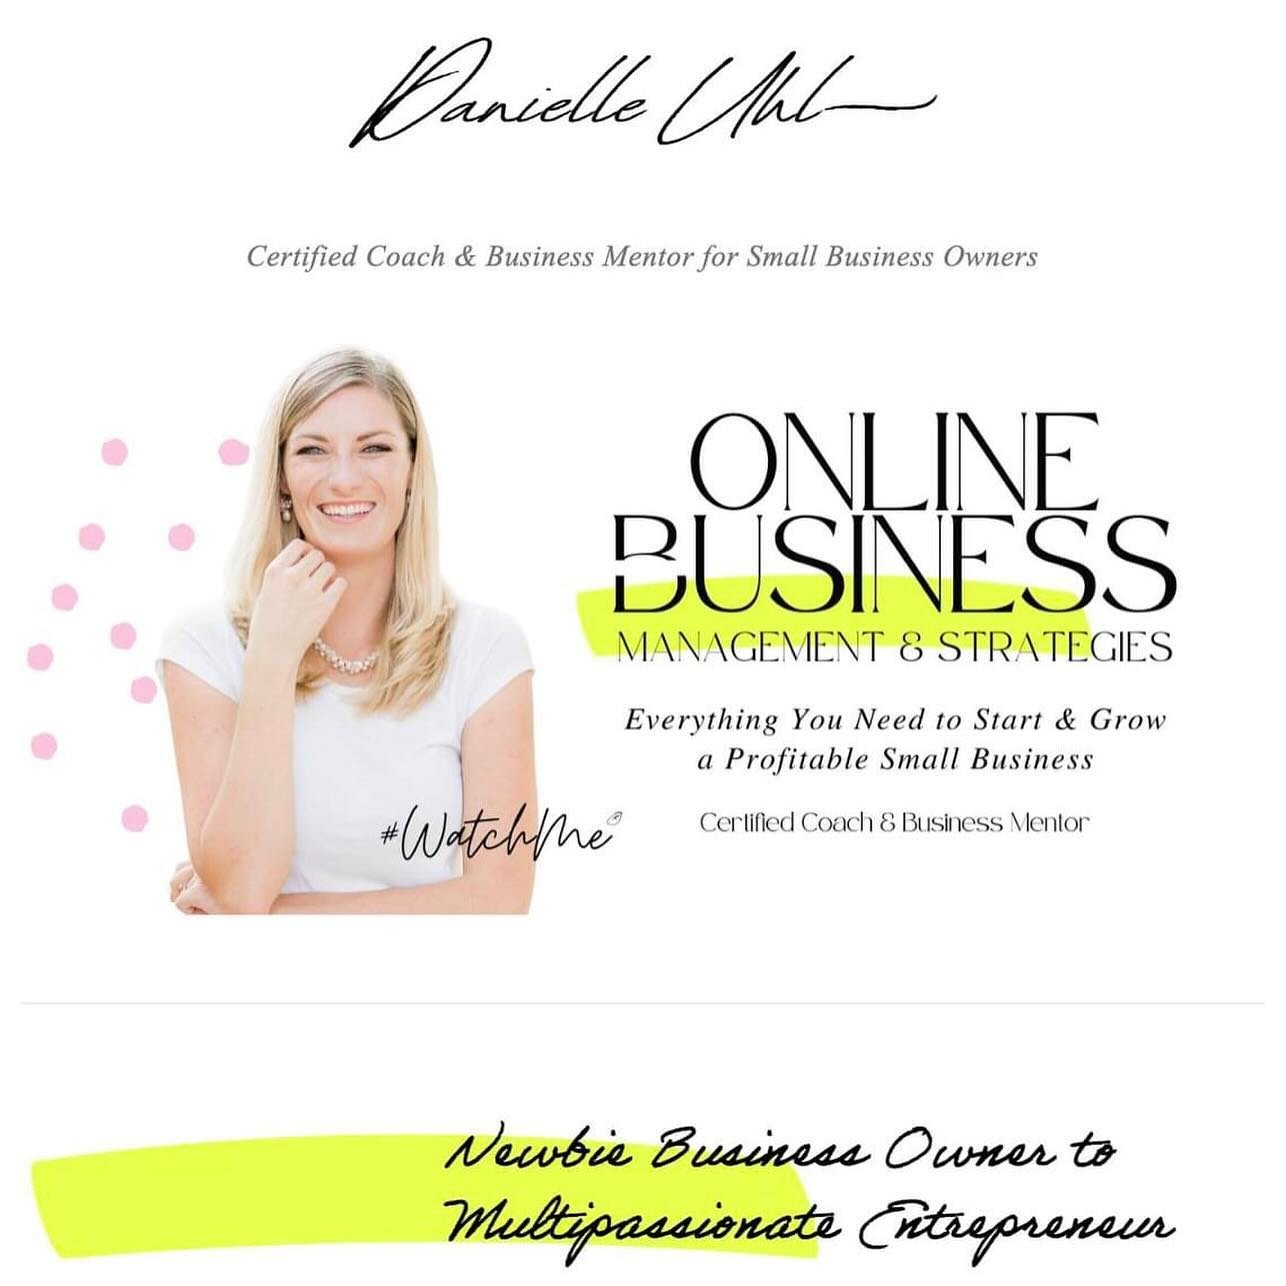 Now offering Website Starter Kit packages 🤩

Just one of the many things small business has taught me is how to create a great website! Over the years, I have created and re-designed multiple websites - here are just a few! 

I&rsquo;m excited to no